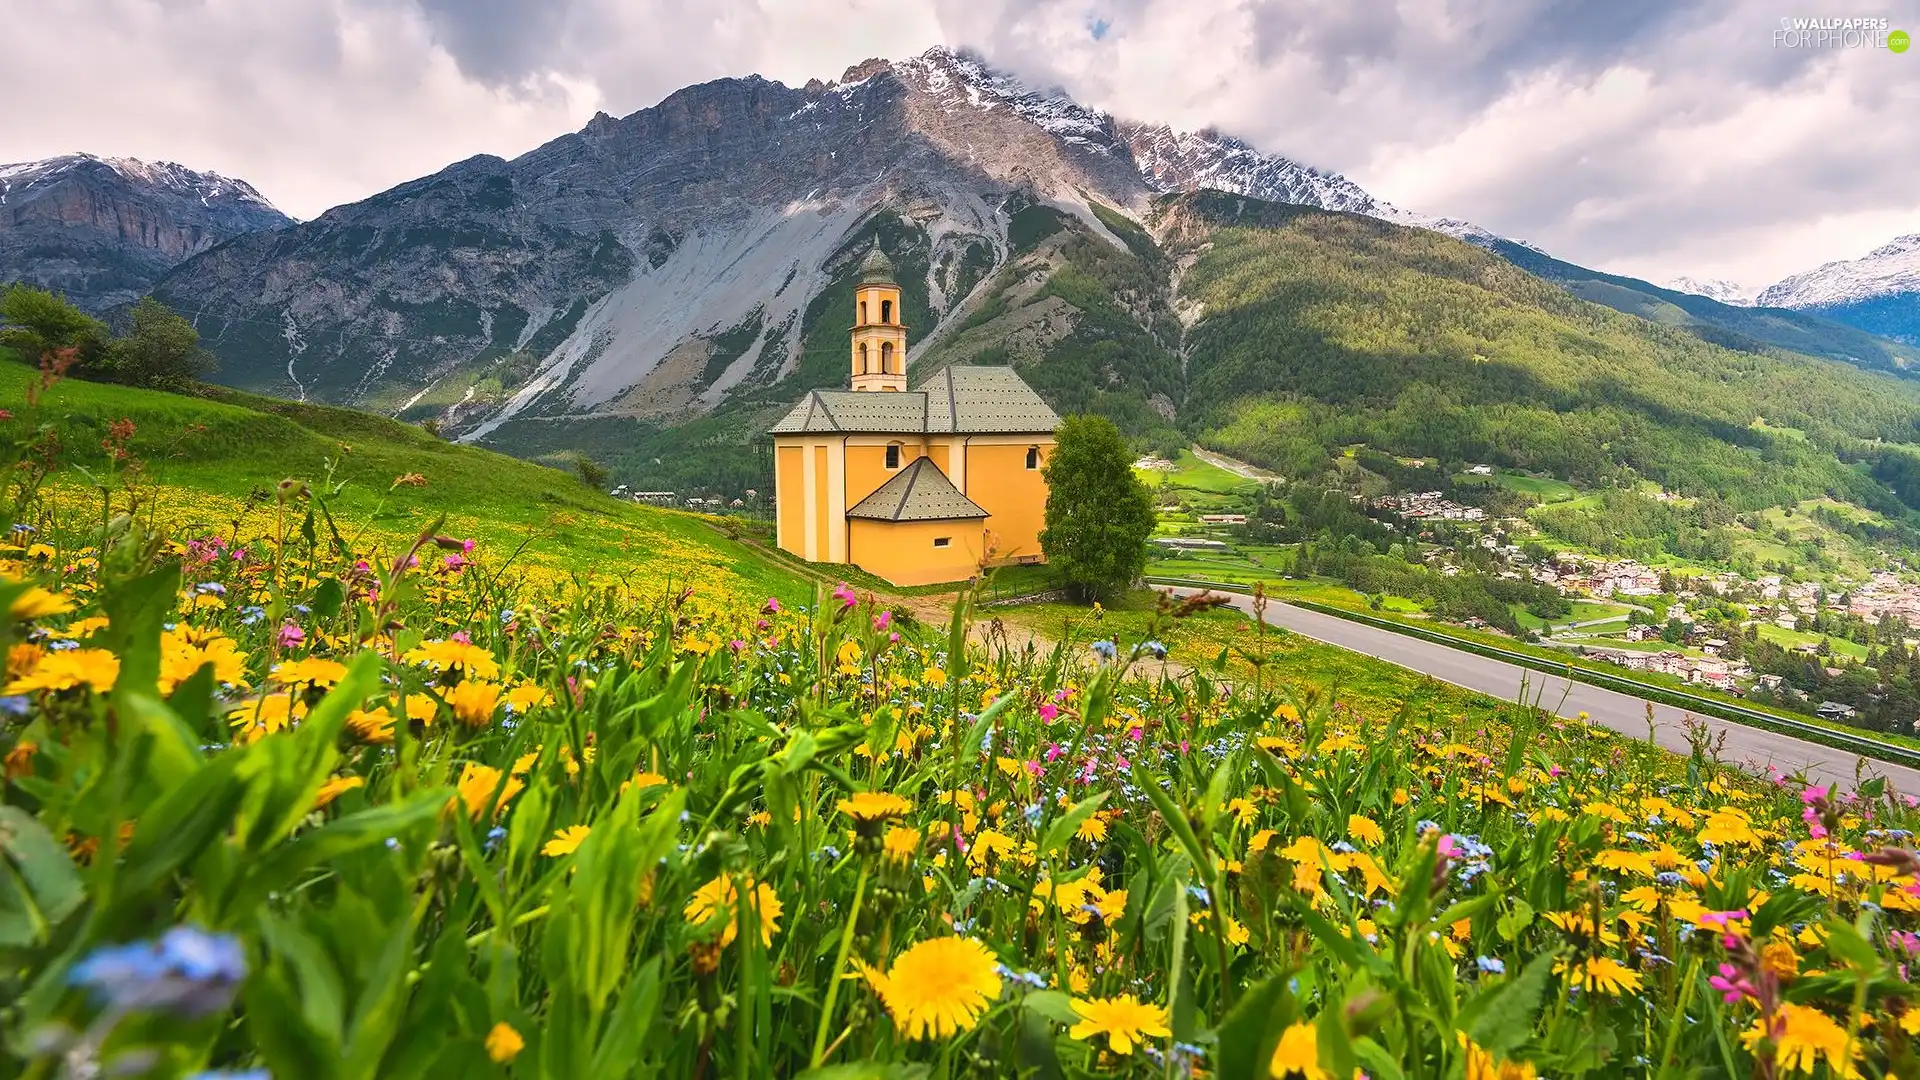 Meadow, church, Houses, Way, Mountains, Flowers, clouds